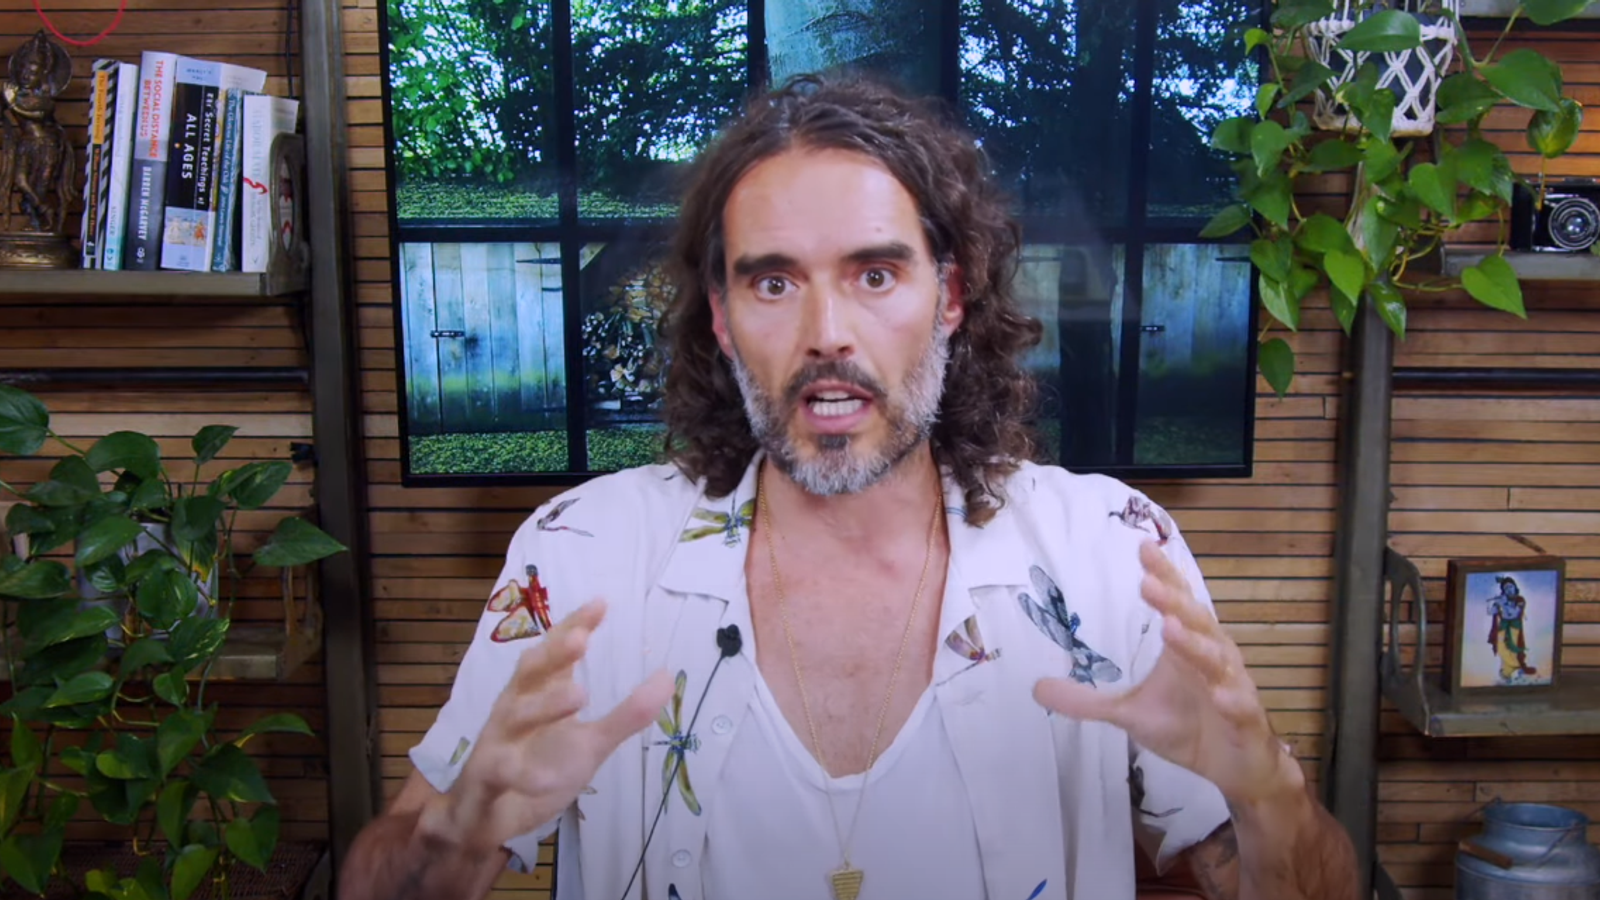 Russell Brand accused of rape, sexual assault and emotional abuse – allegations he denies | Ents & Arts News